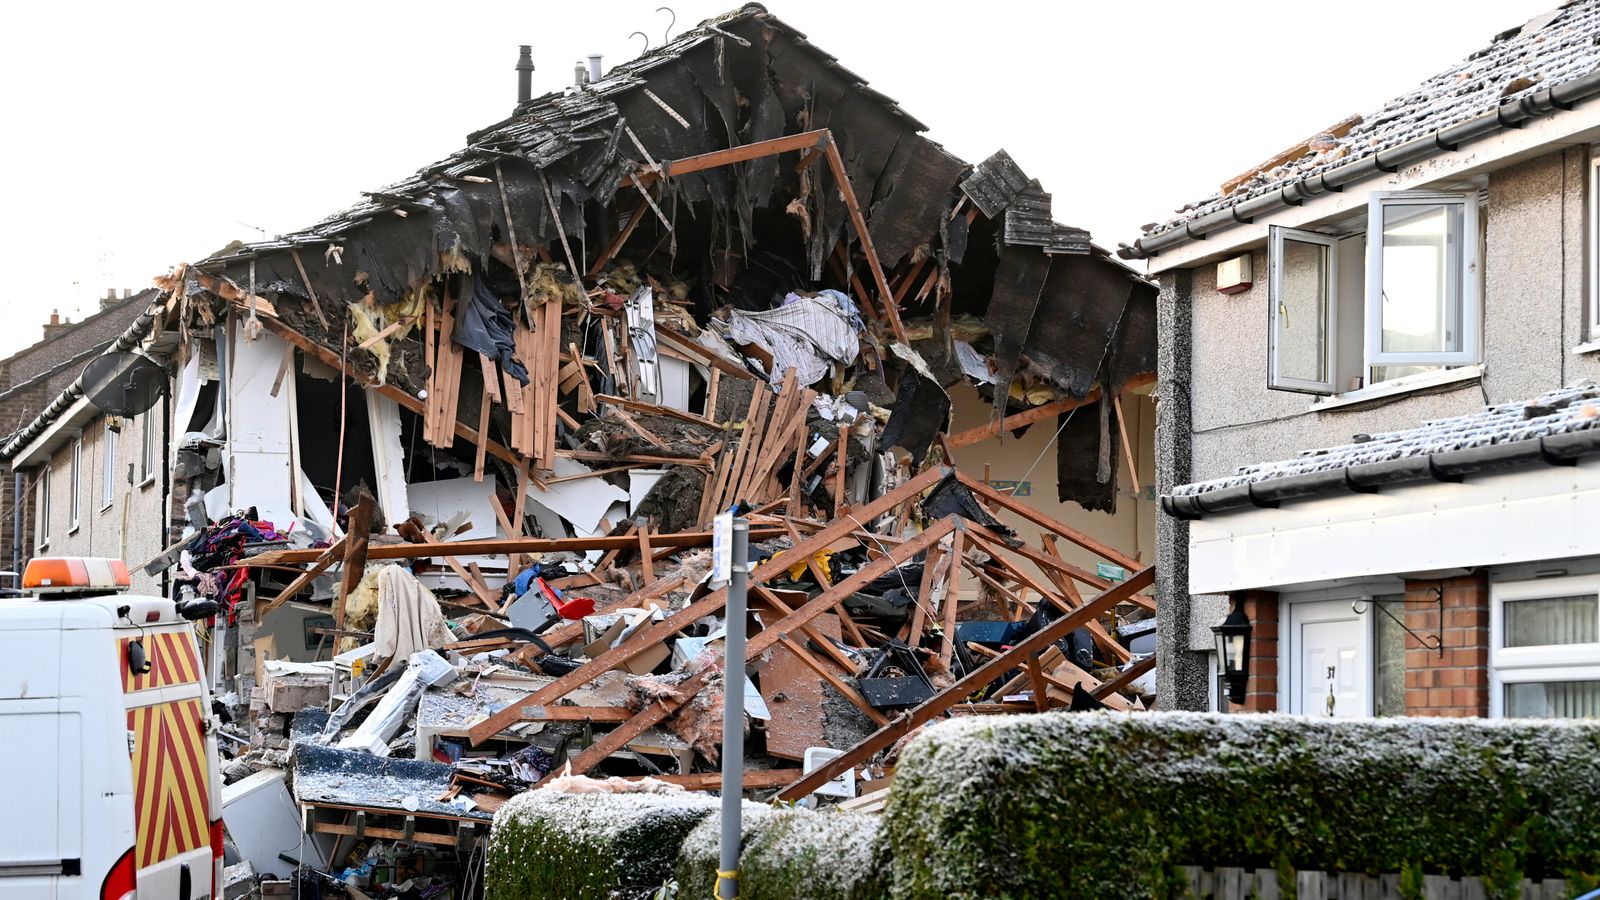 Edinburgh: Heroic neighbours rescue man and woman after deadly house explosion 